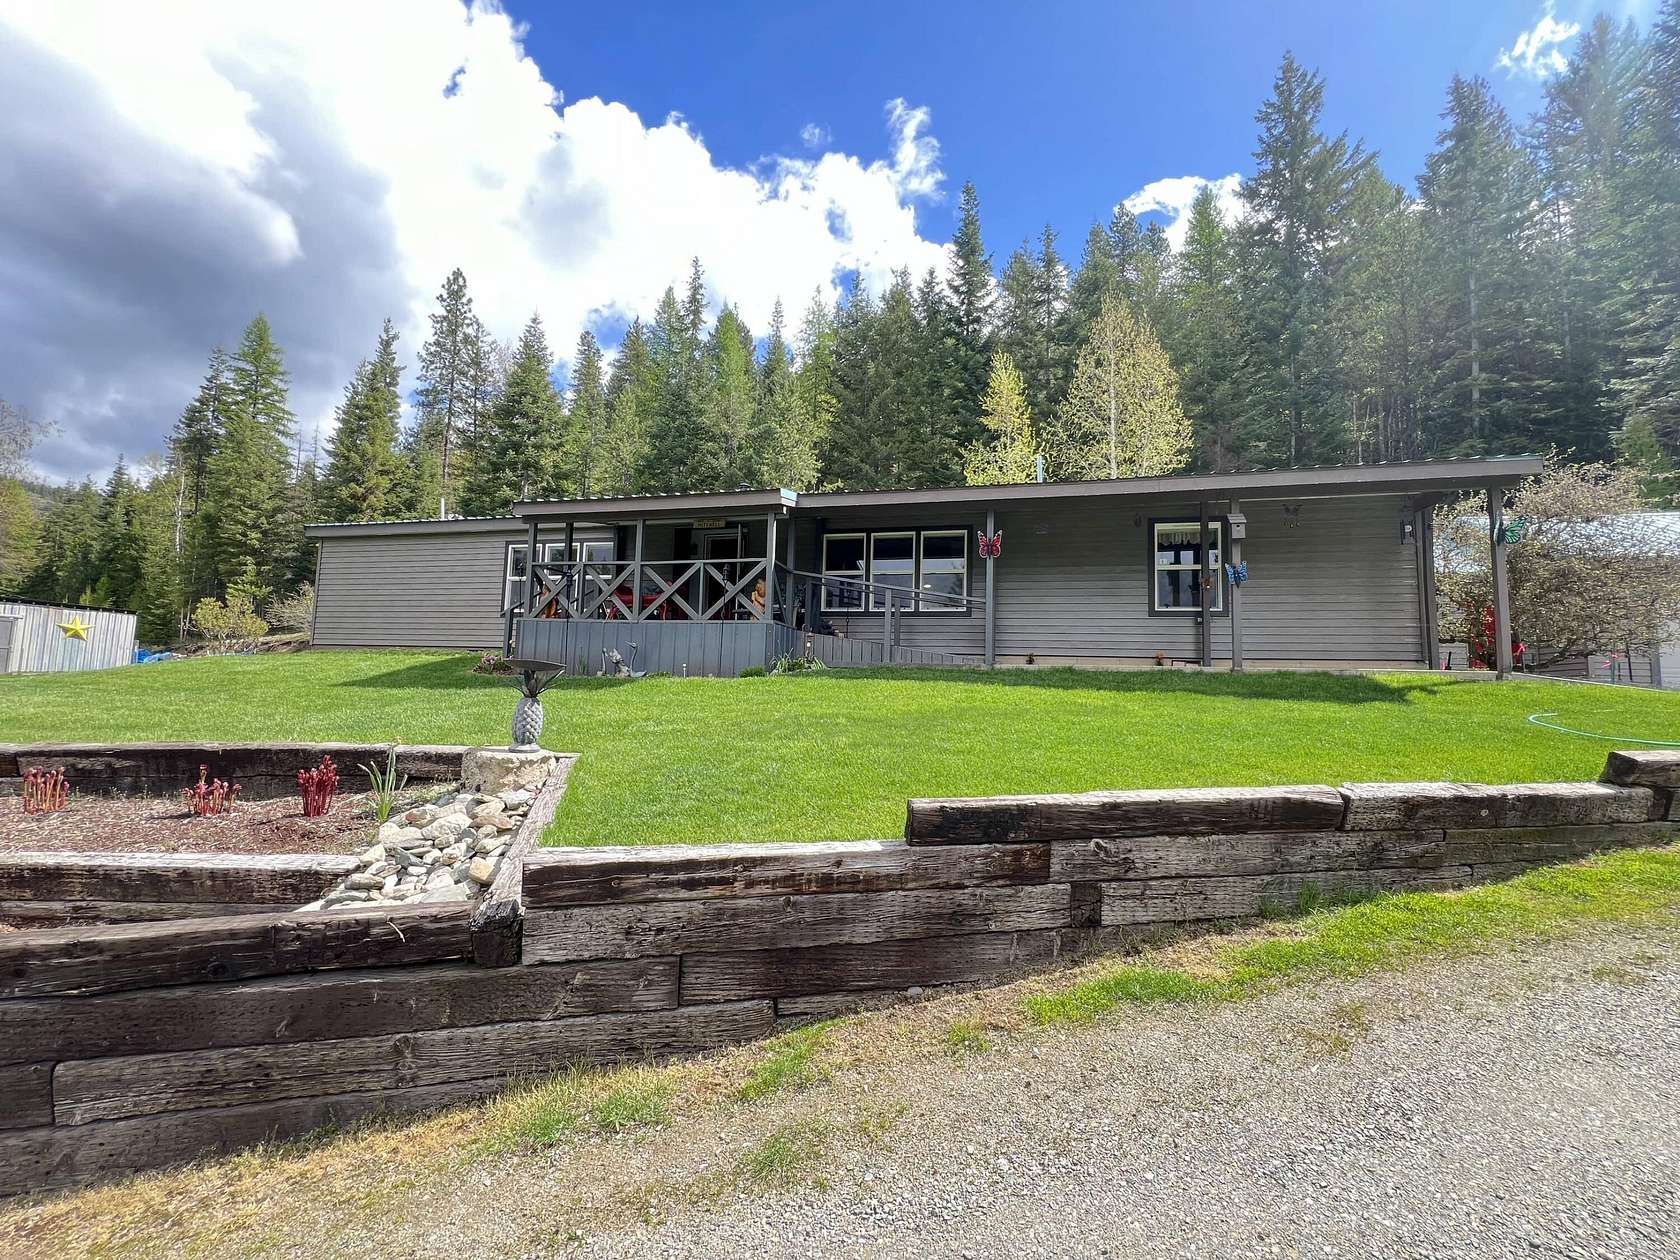 17 Acres of Land with Home for Sale in Cusick, Washington